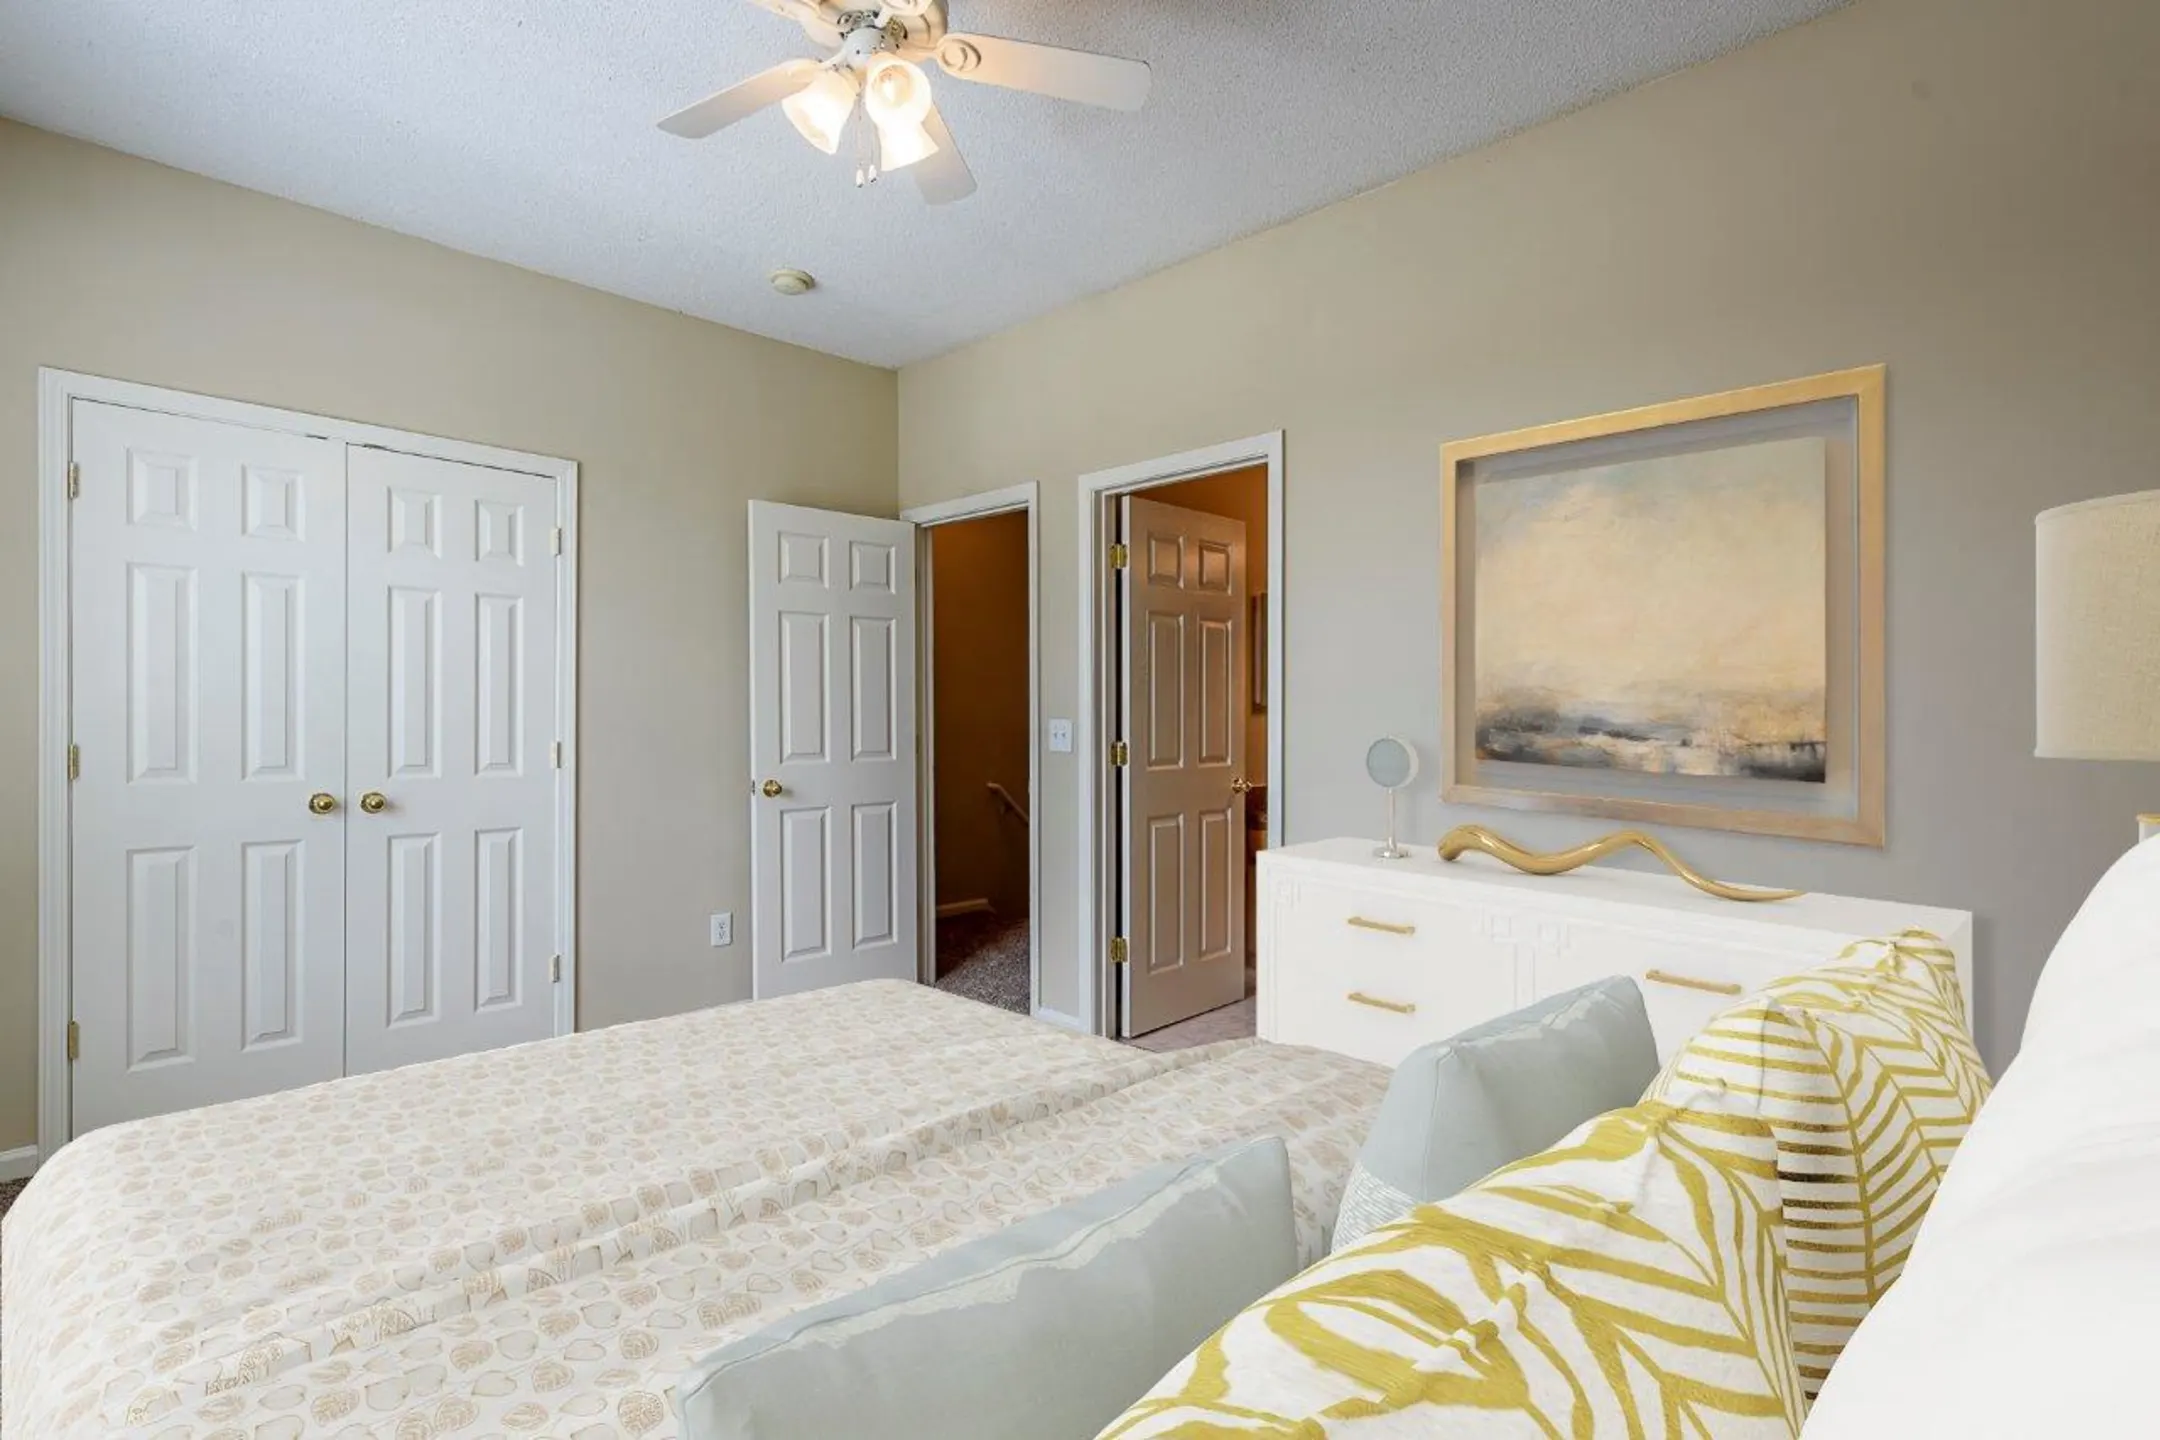 Bedroom - Falls Creek Apartments & Townhomes - Raleigh, NC